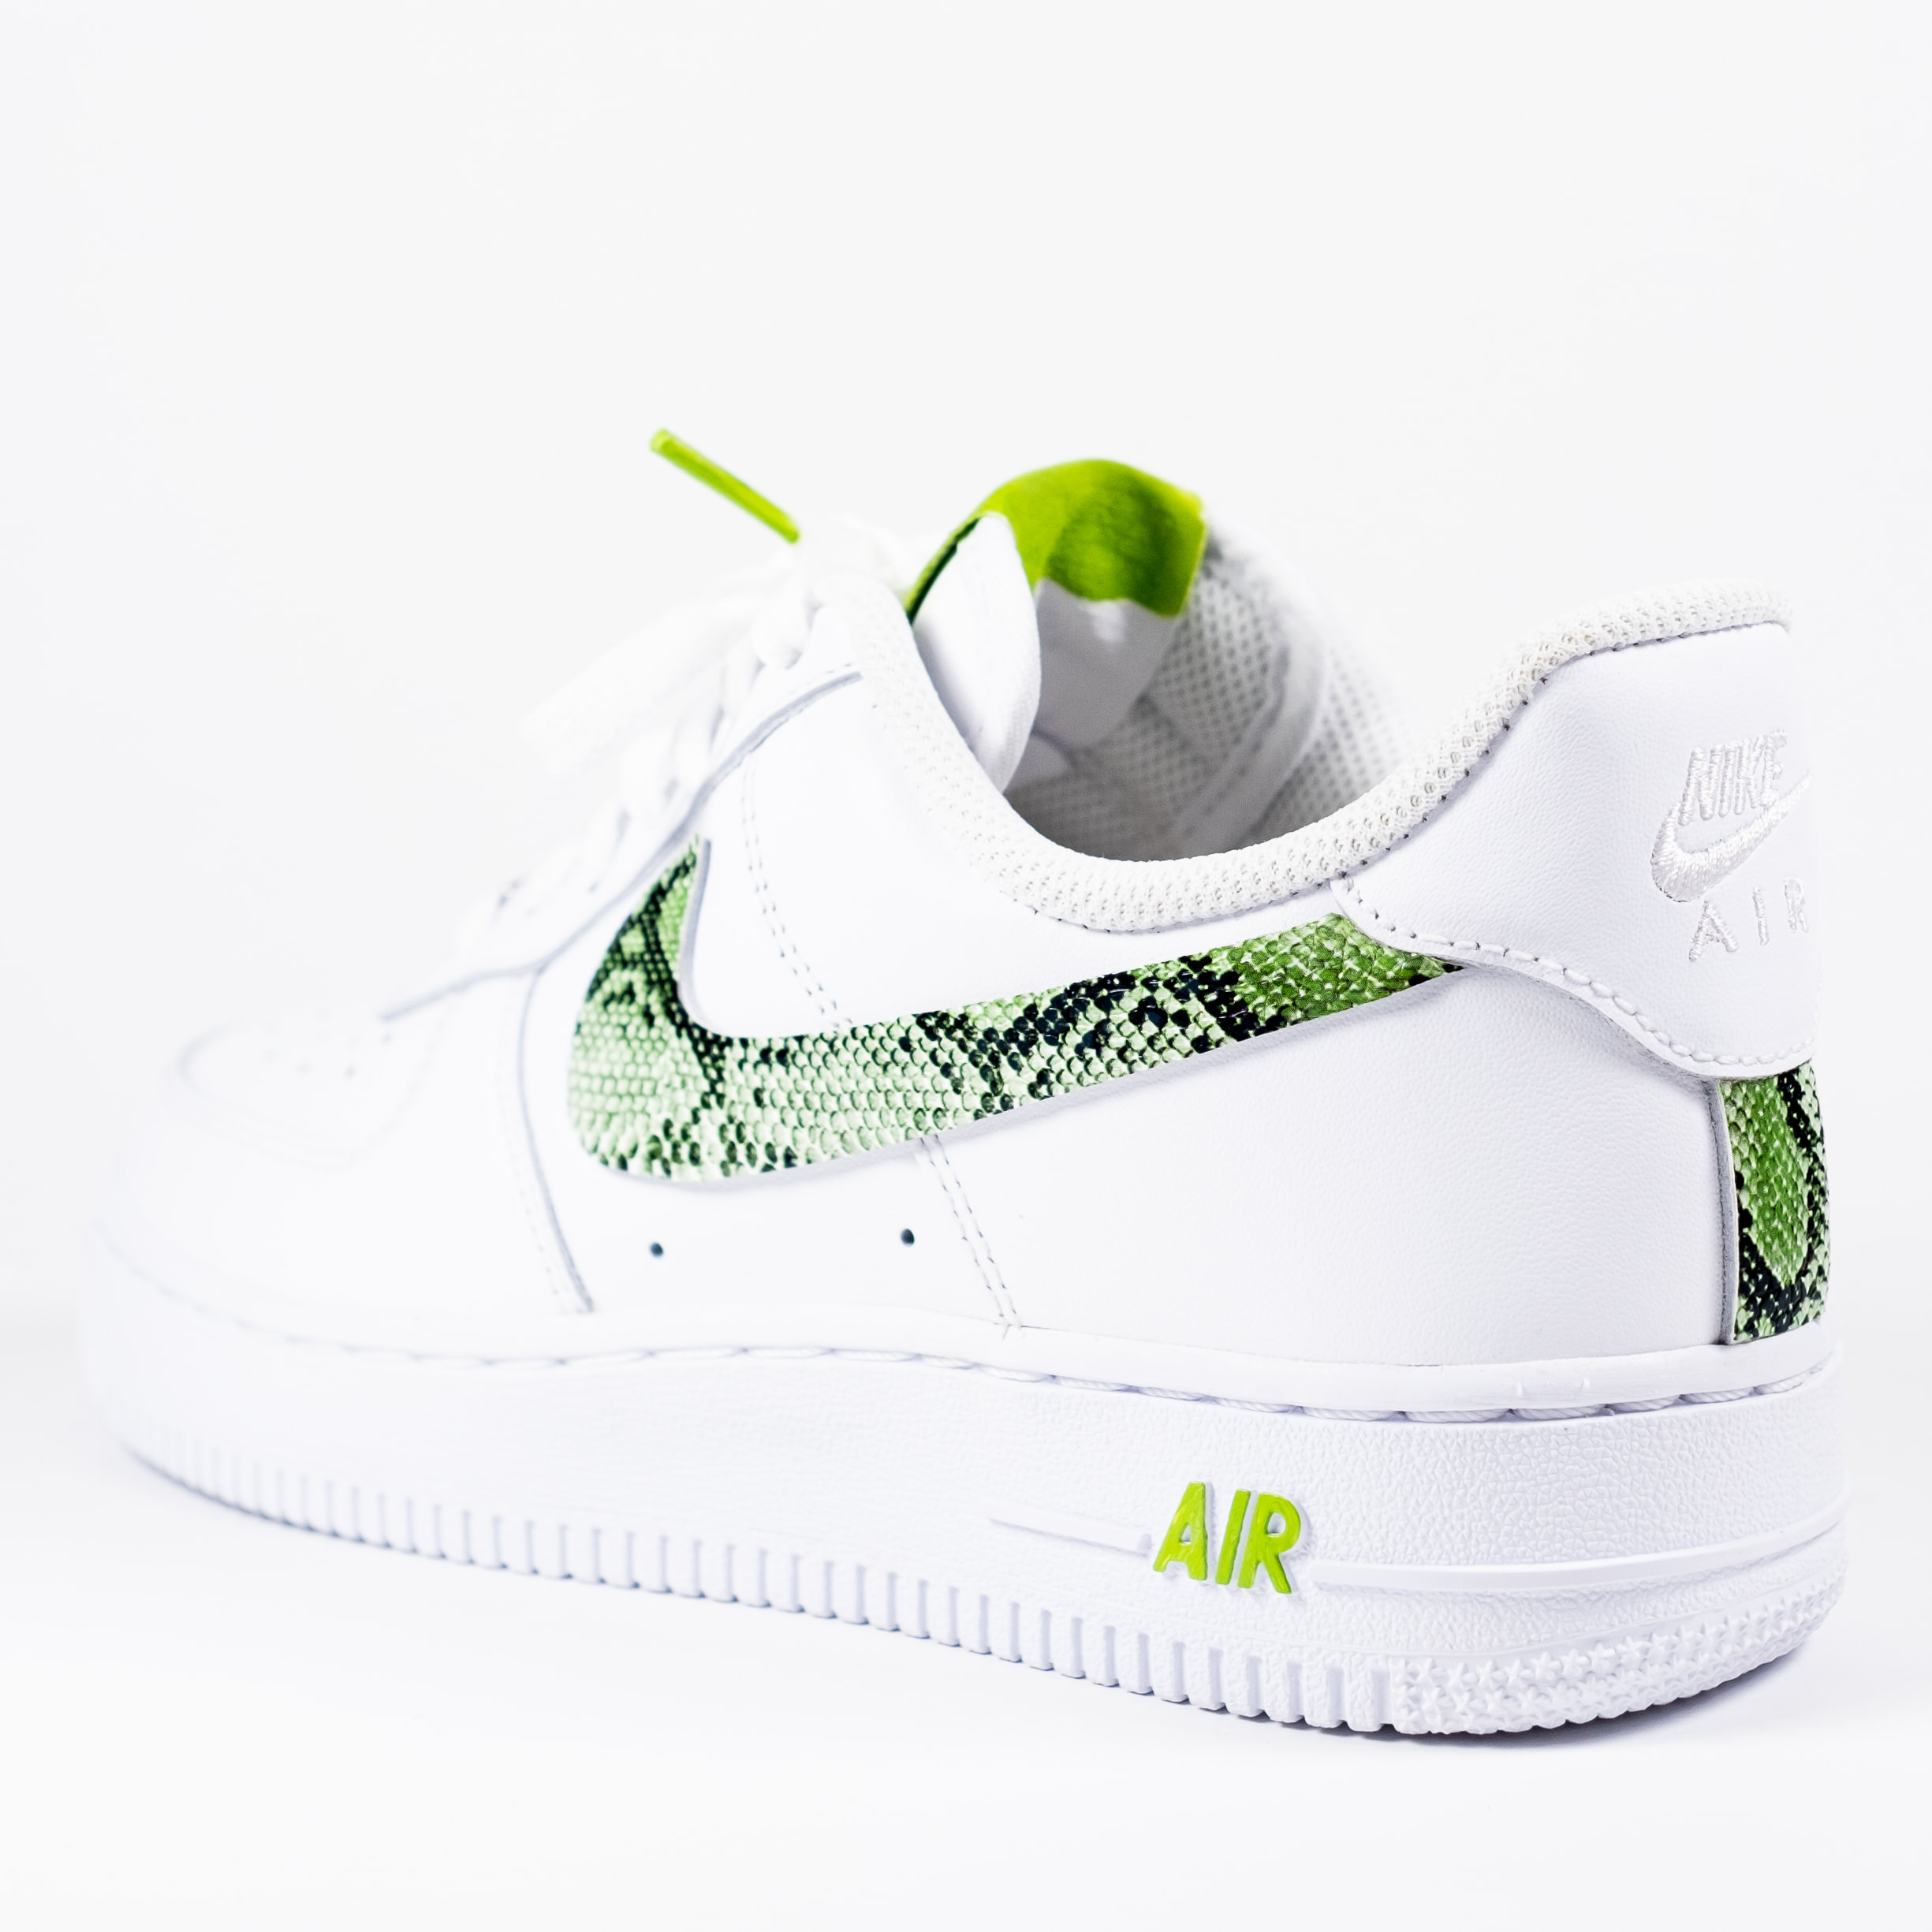 slime green air forces